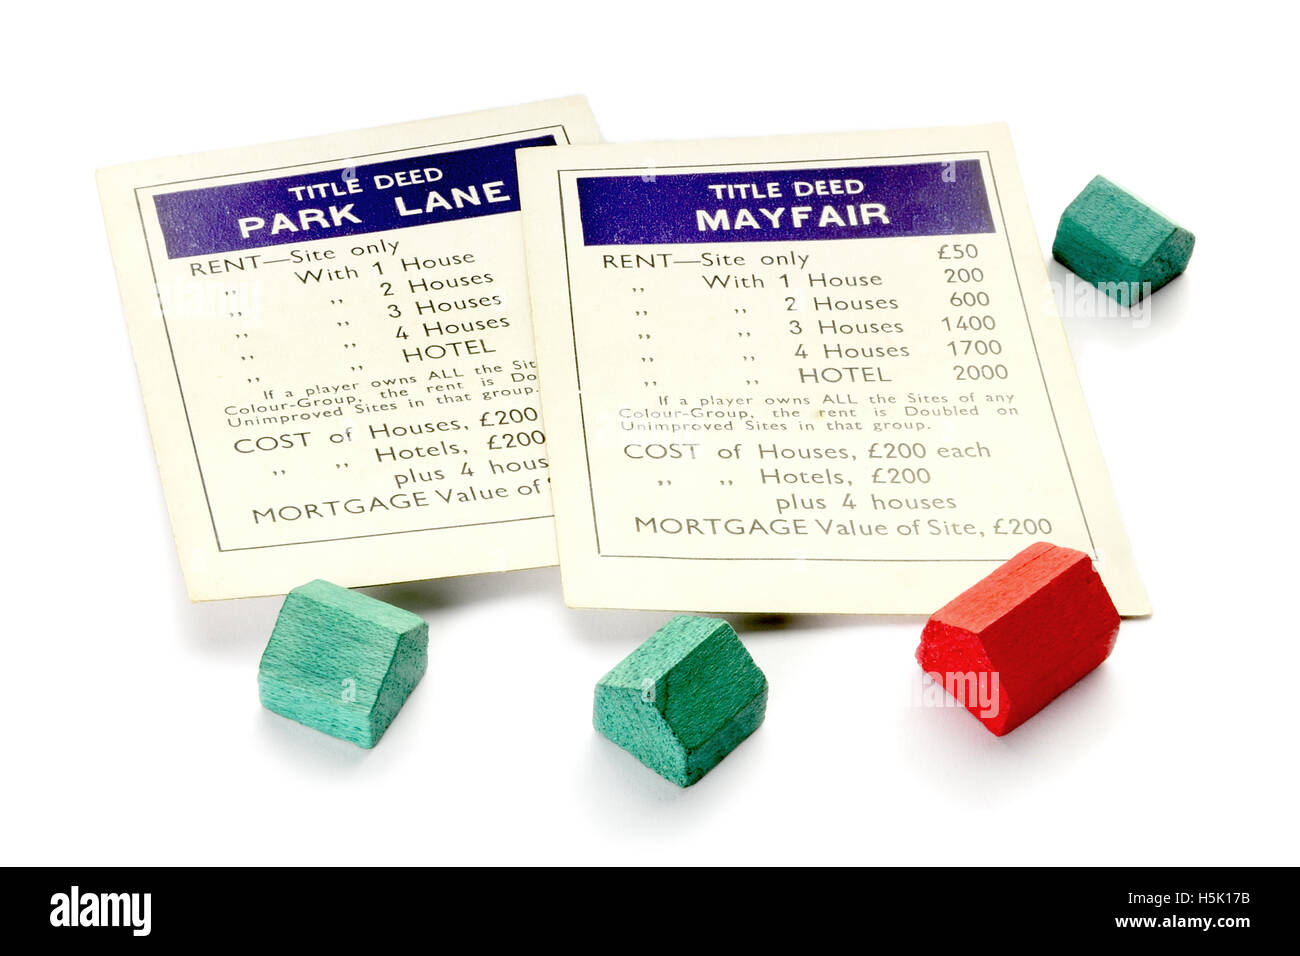 Vintage British Monopoly game (Park Lane and Mayfair title deed cards) circa 1940 Stock Photo